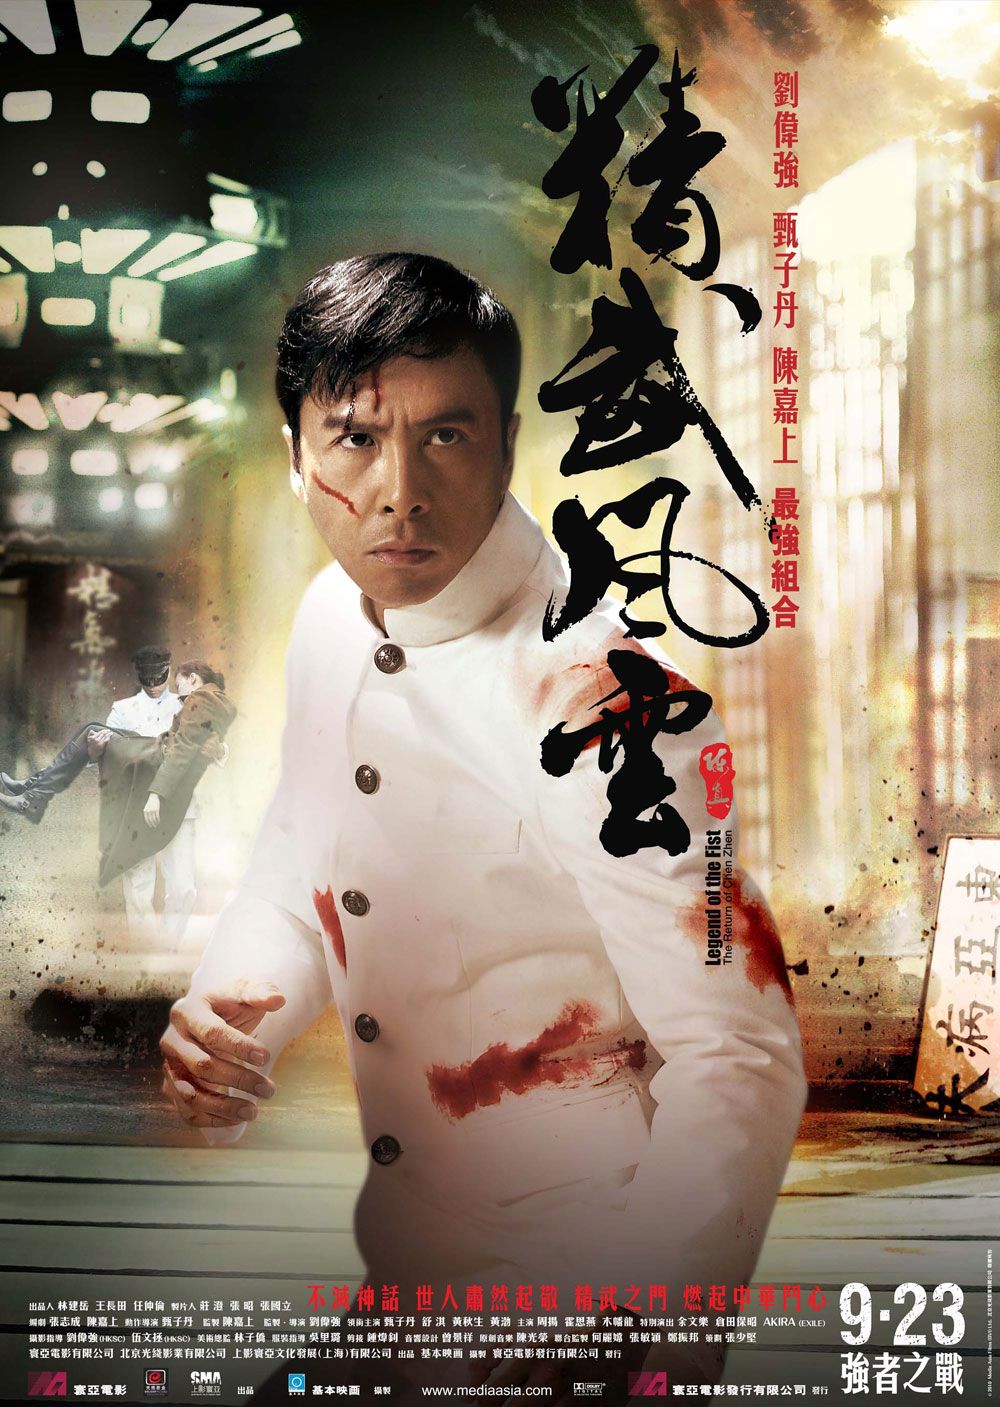 Extra Large Movie Poster Image for Jing mo fung wan: Chen Zhen (#4 of 5)